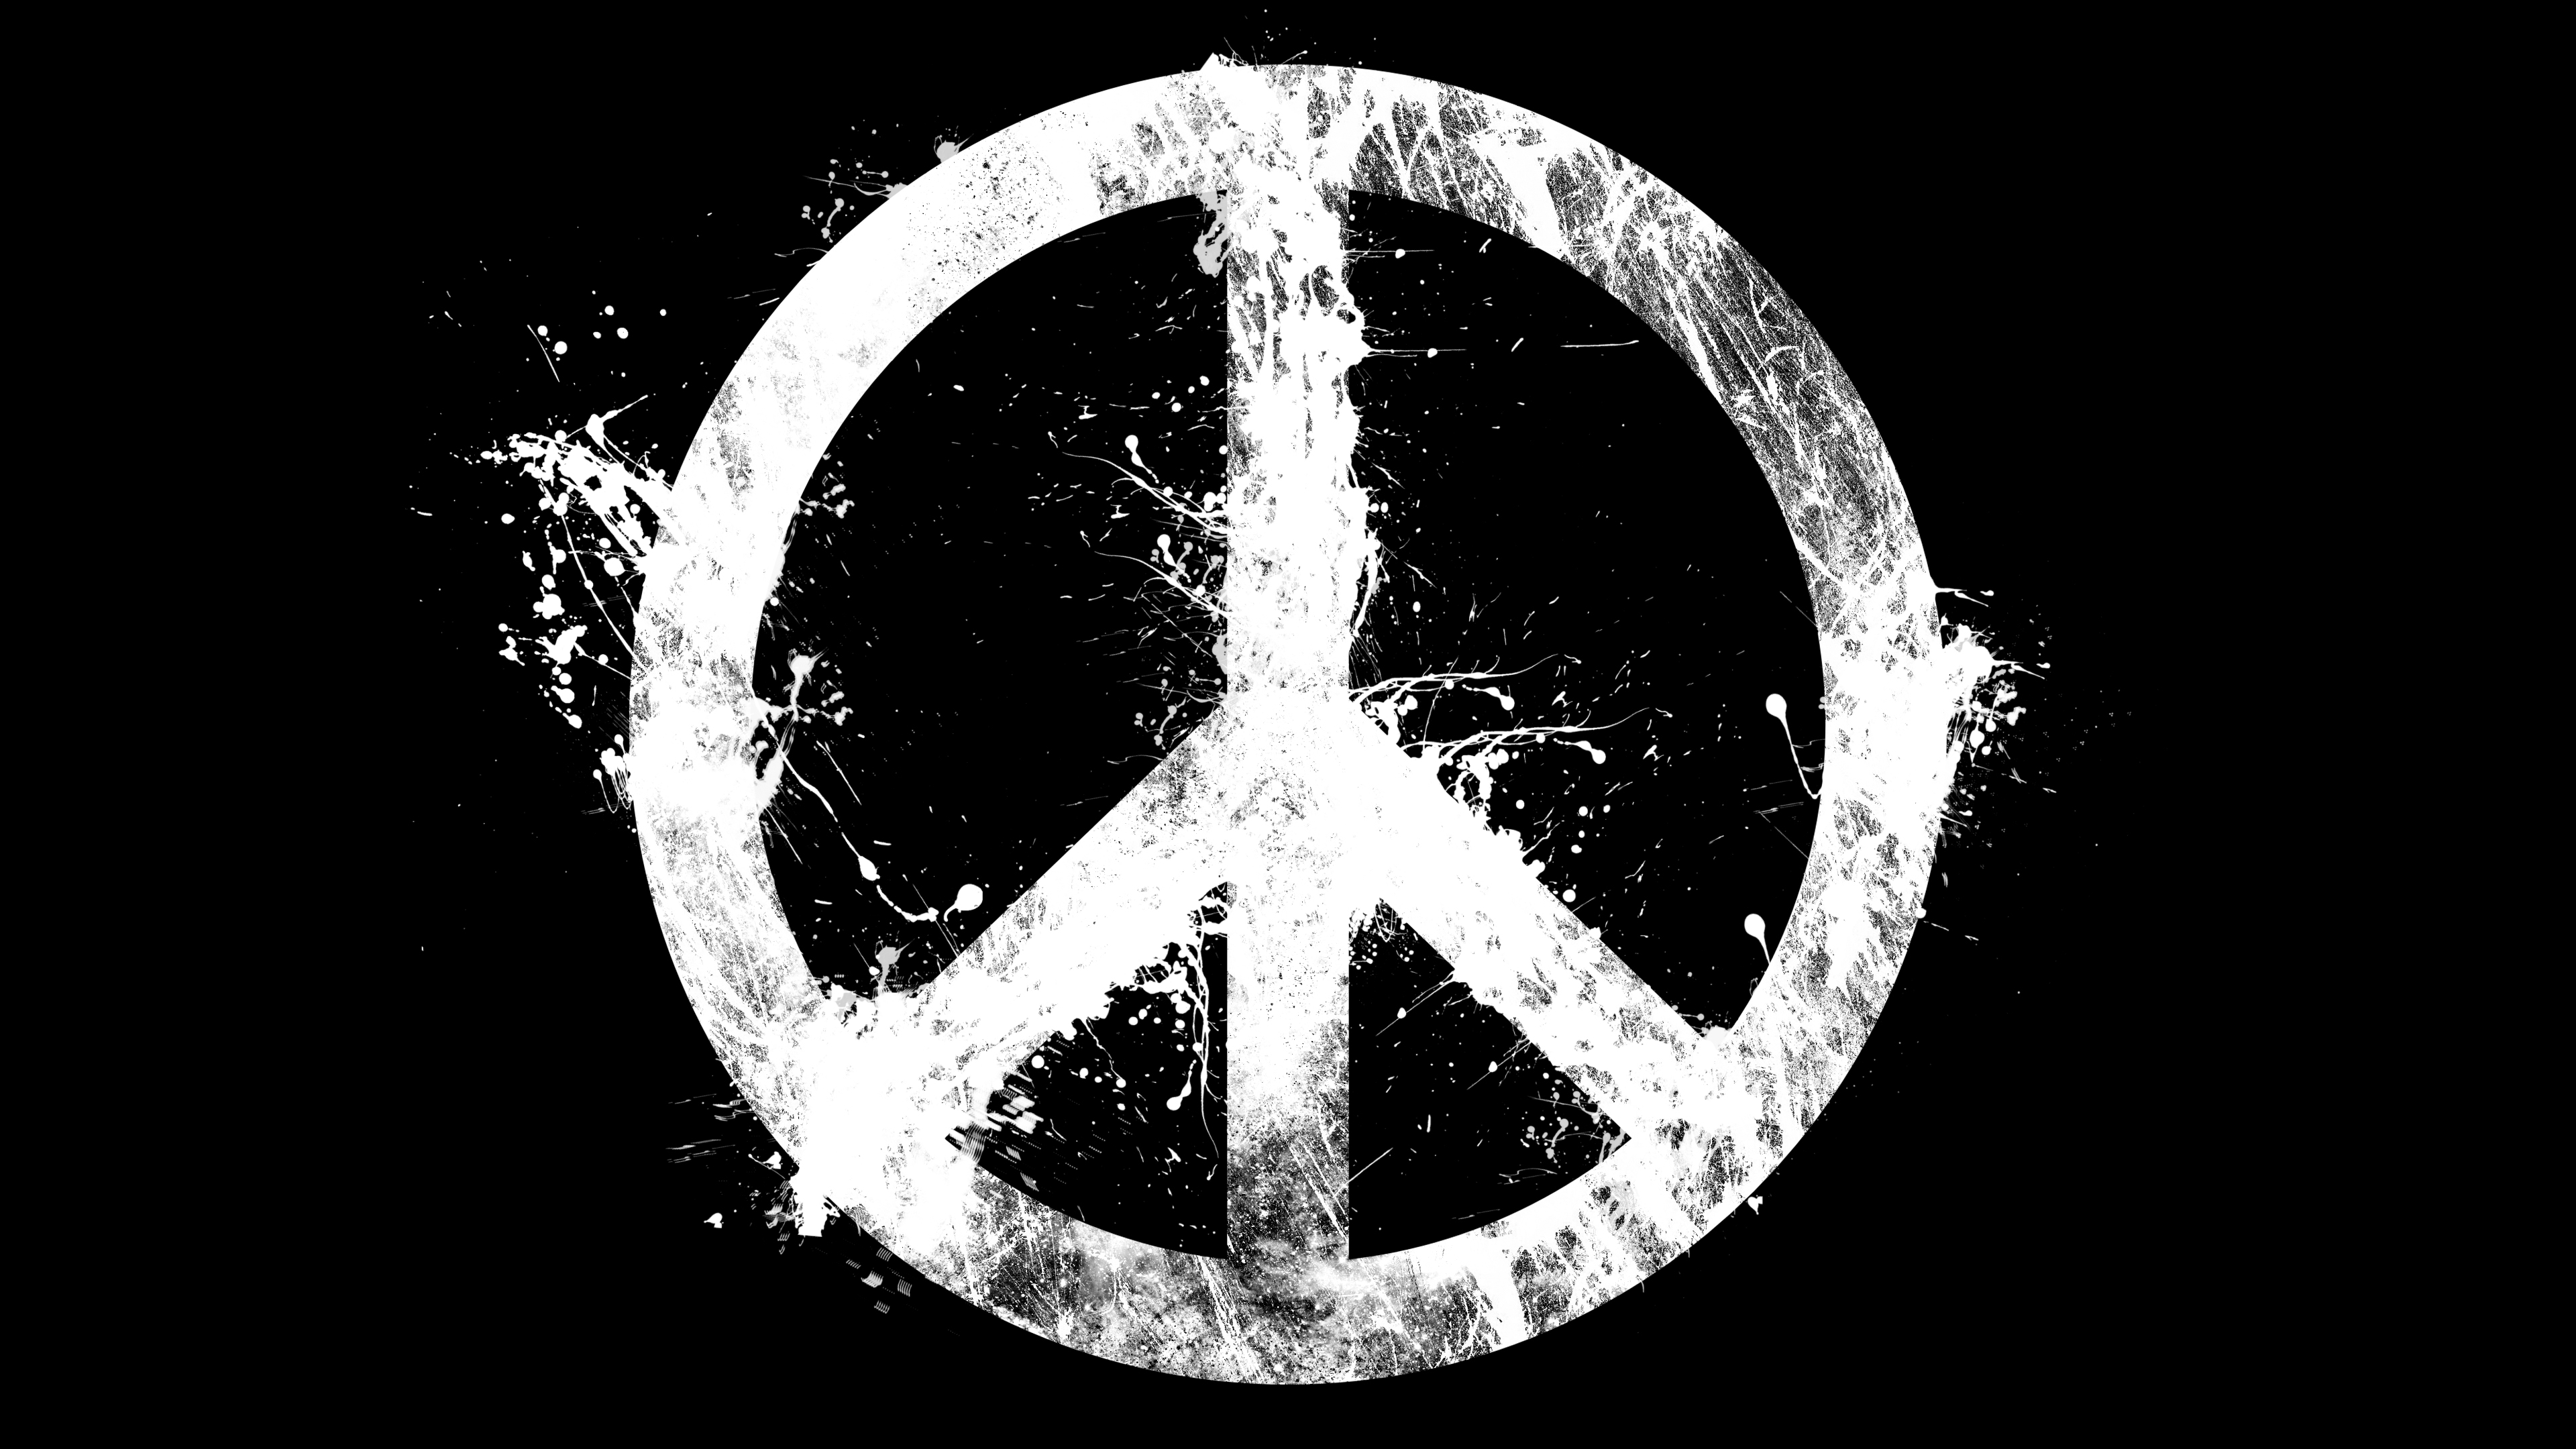 peace wallpaper by spideyx25 - Download on ZEDGE™ | bc58-mncb.edu.vn